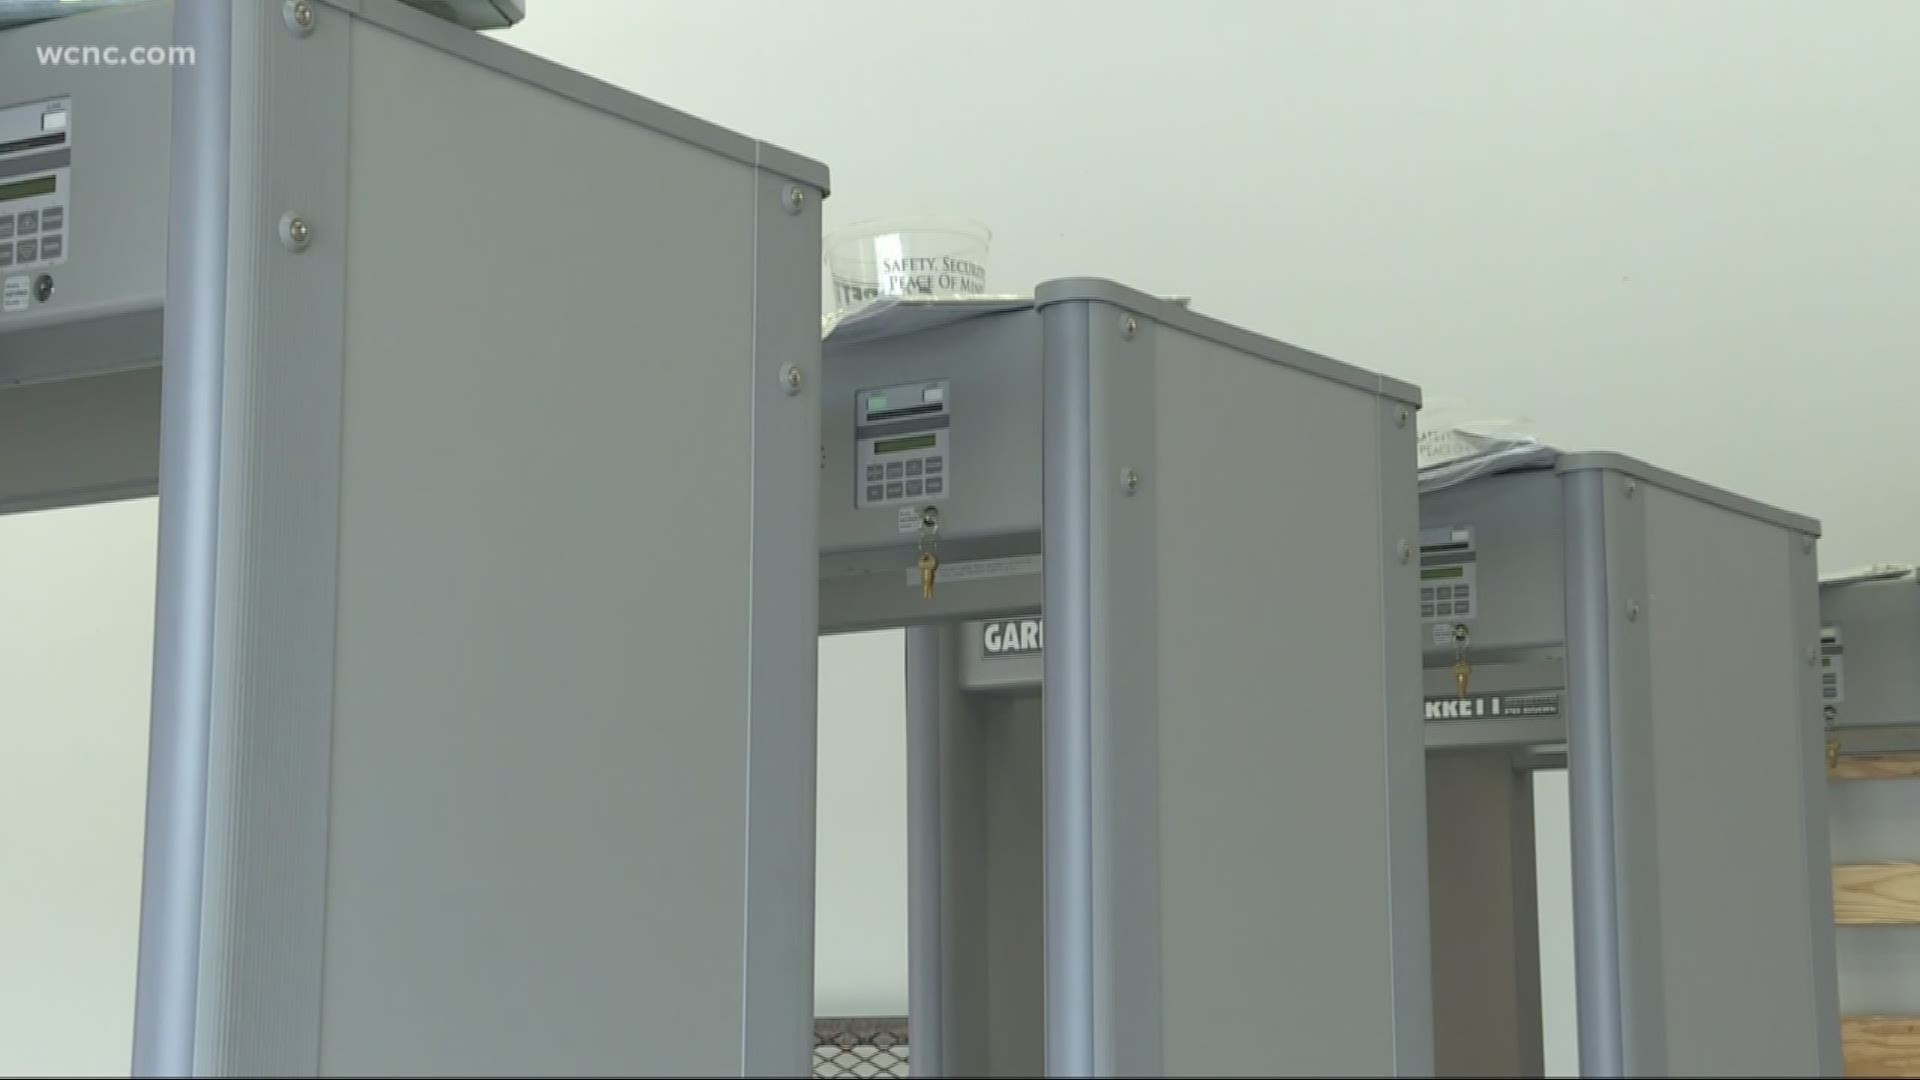 Chesterfield County is adding an extra level of security by putting metal detectors in some of their middle and high schools.